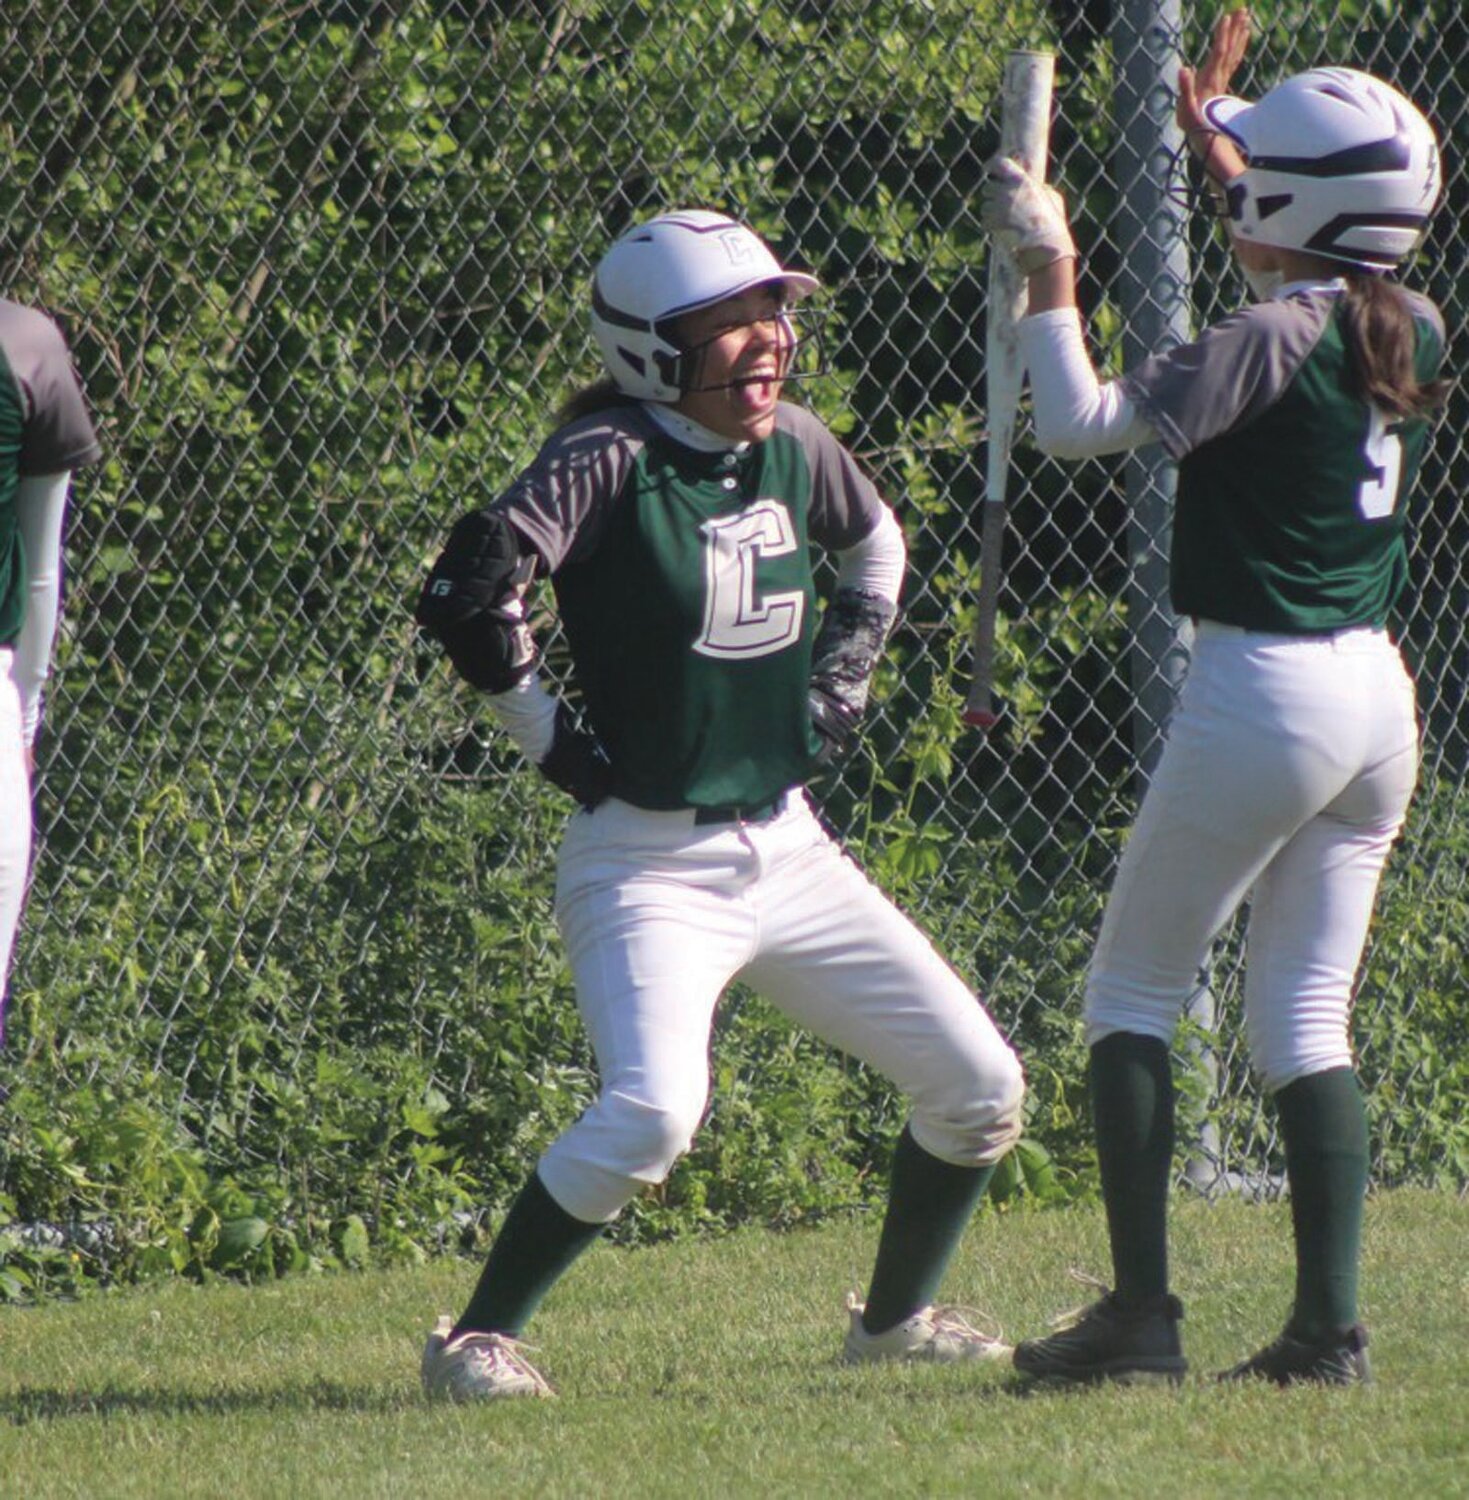 HOME RUN: Cranston East’s Nevaeh Fatorma celebrates after hitting a home run against Davies last week in the Division III play-in game. Fatorma finished the game with four hits and three runs batted in. (Photos by Alex Sponseller)